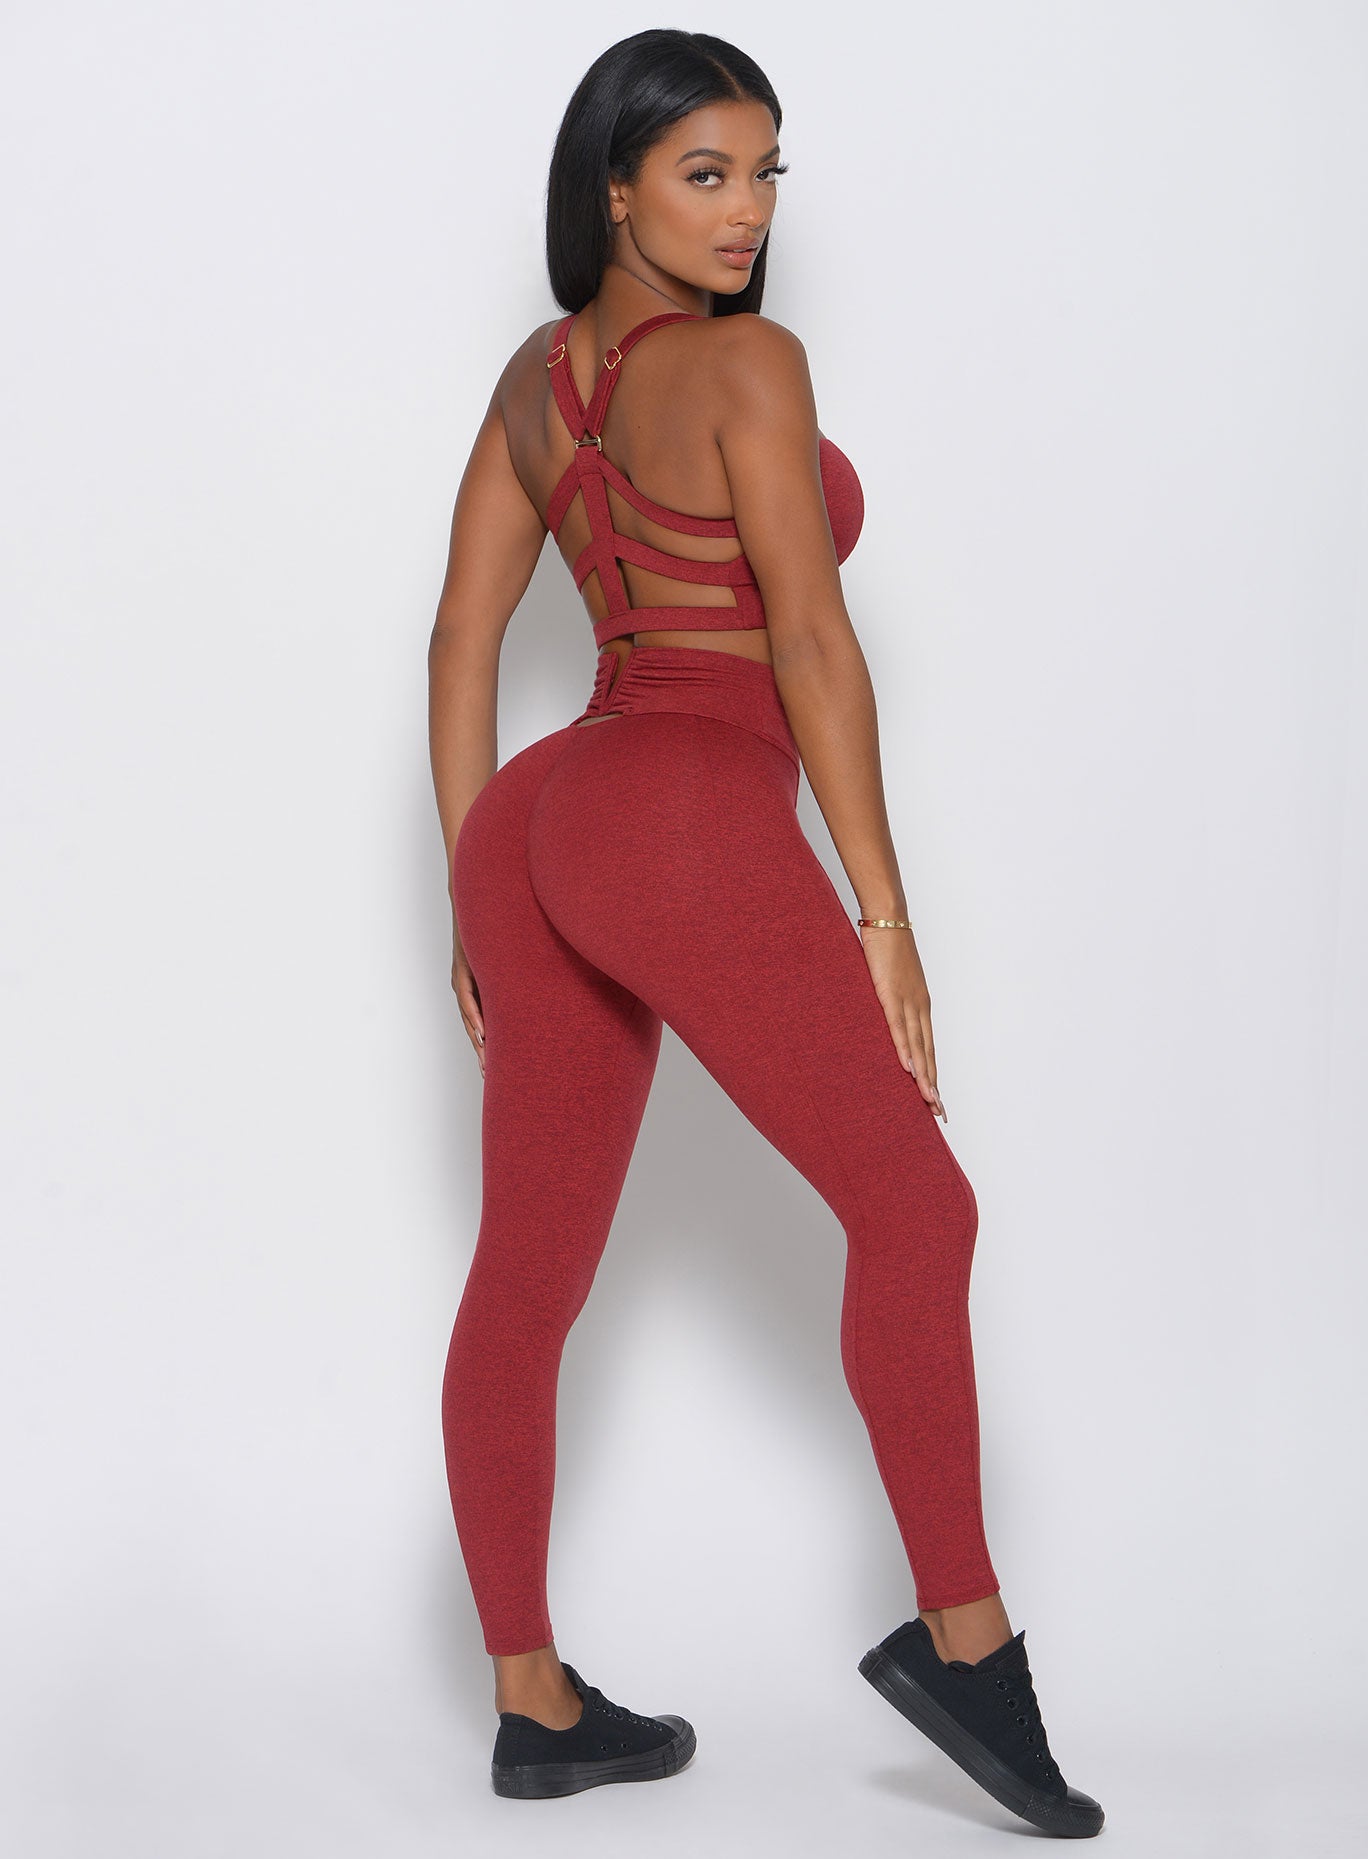 Back iew of the model in a red high waist leggings with a V back design